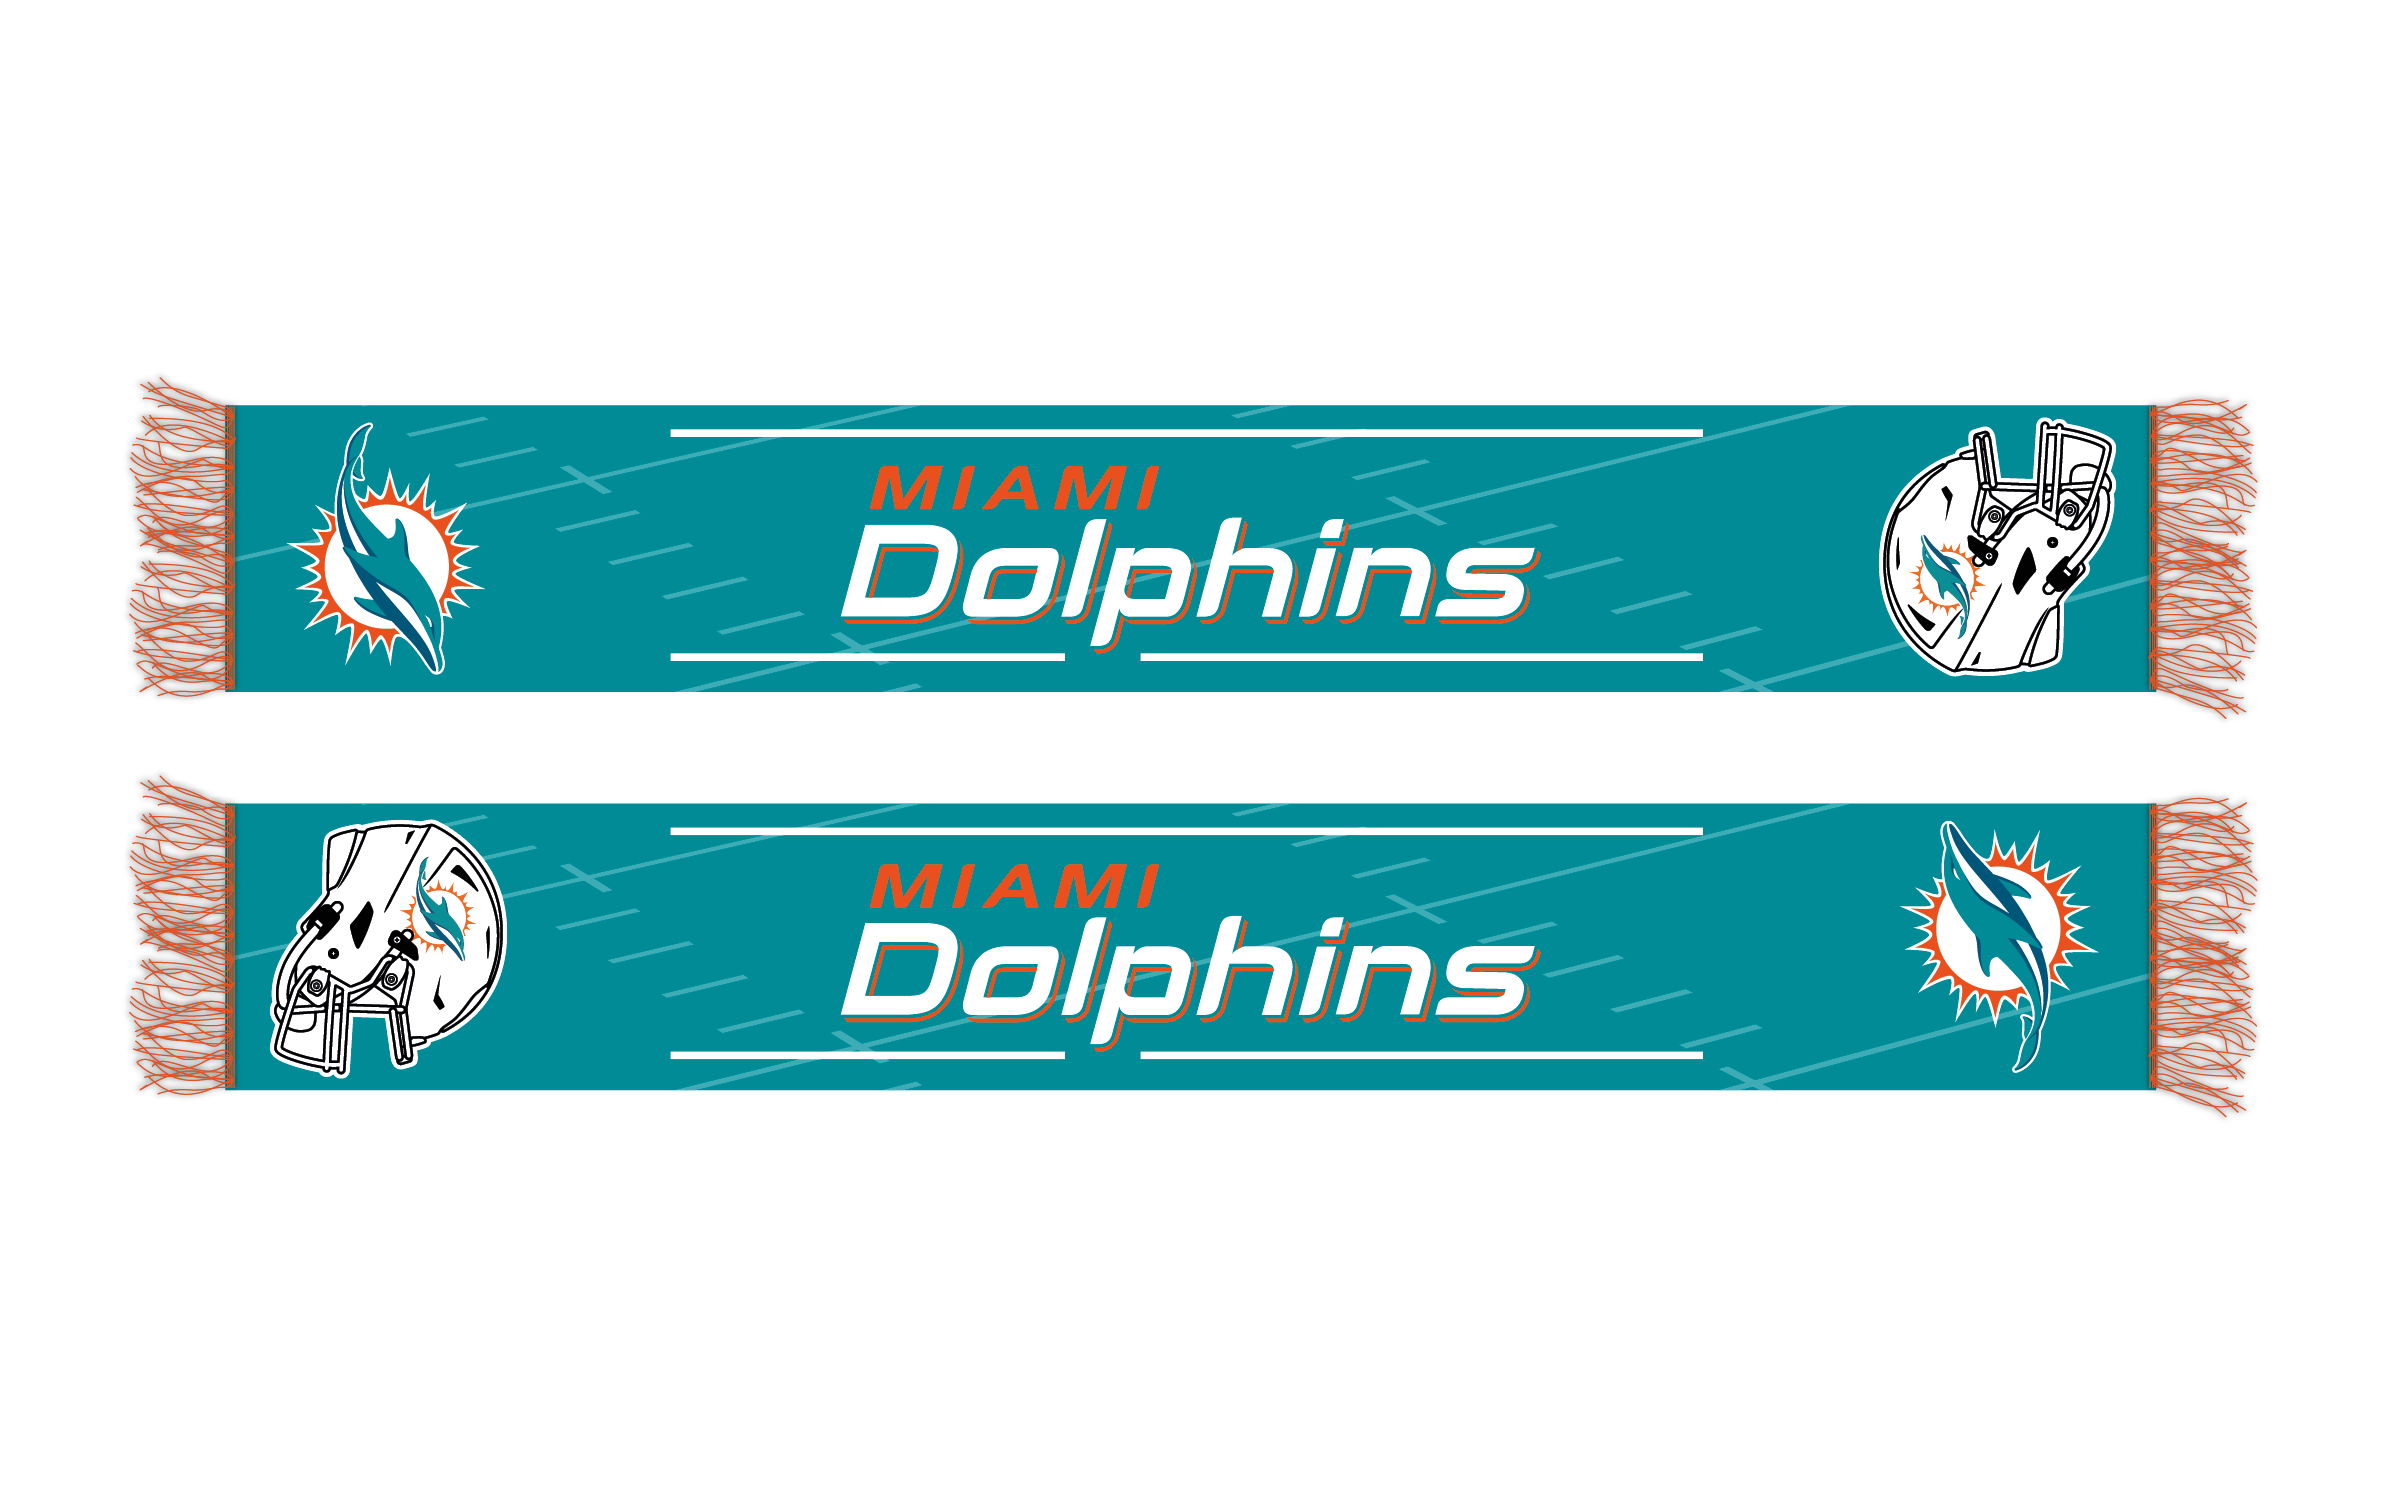 Miami Dolphins HD Knitted Jaquard Scarf 